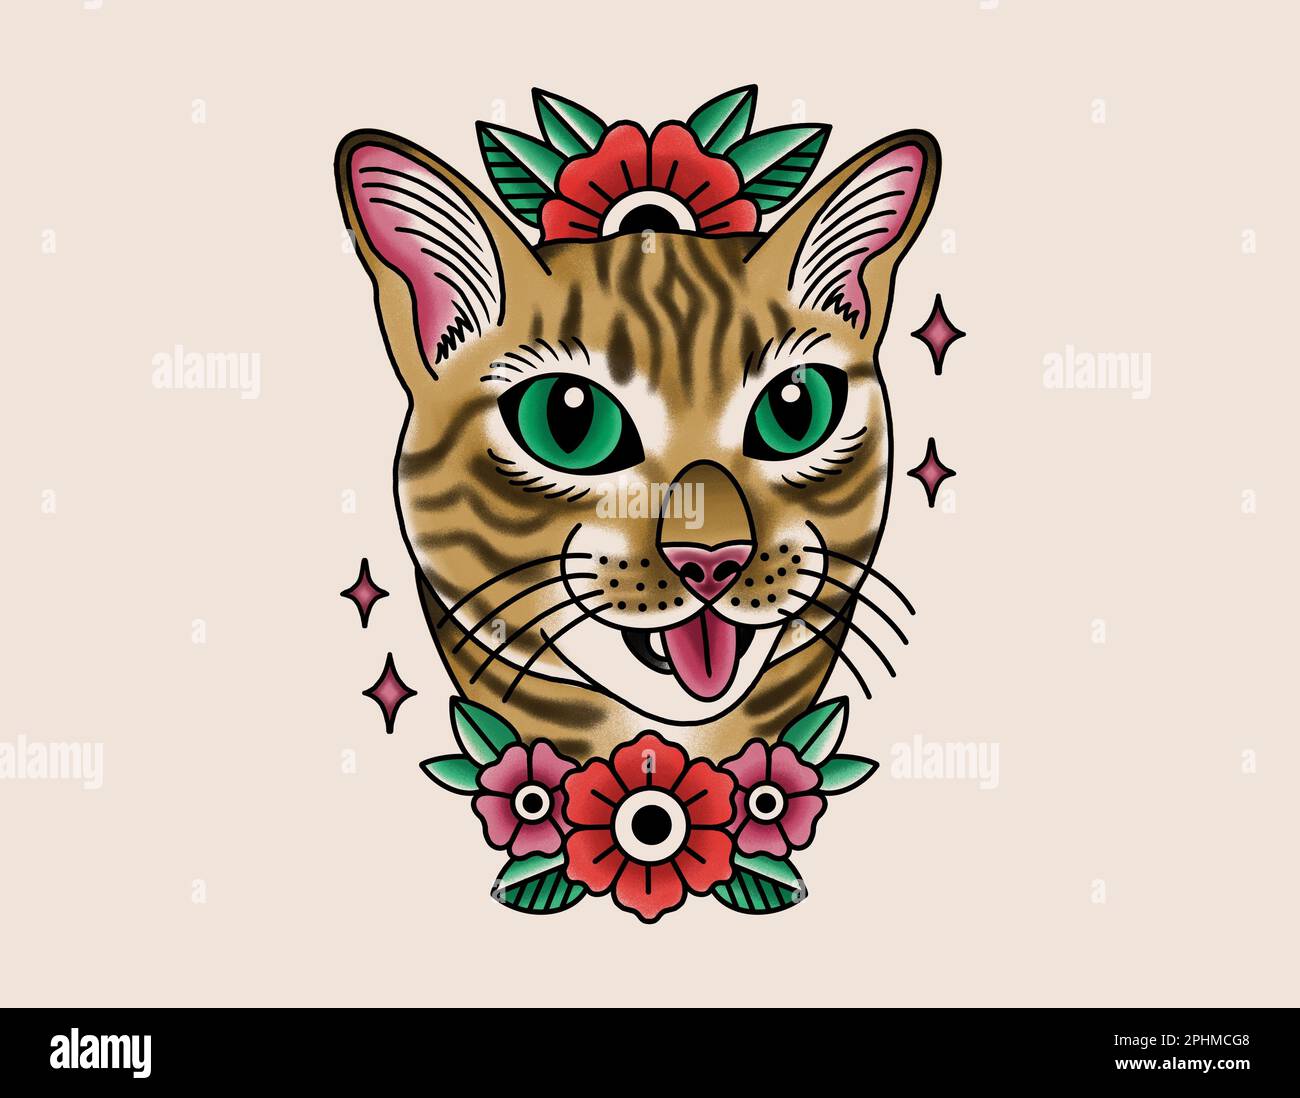 Neo traditional tattoo style drawing  cute cat face portrait with flowers, happy colors and sparkle stars Stock Photo